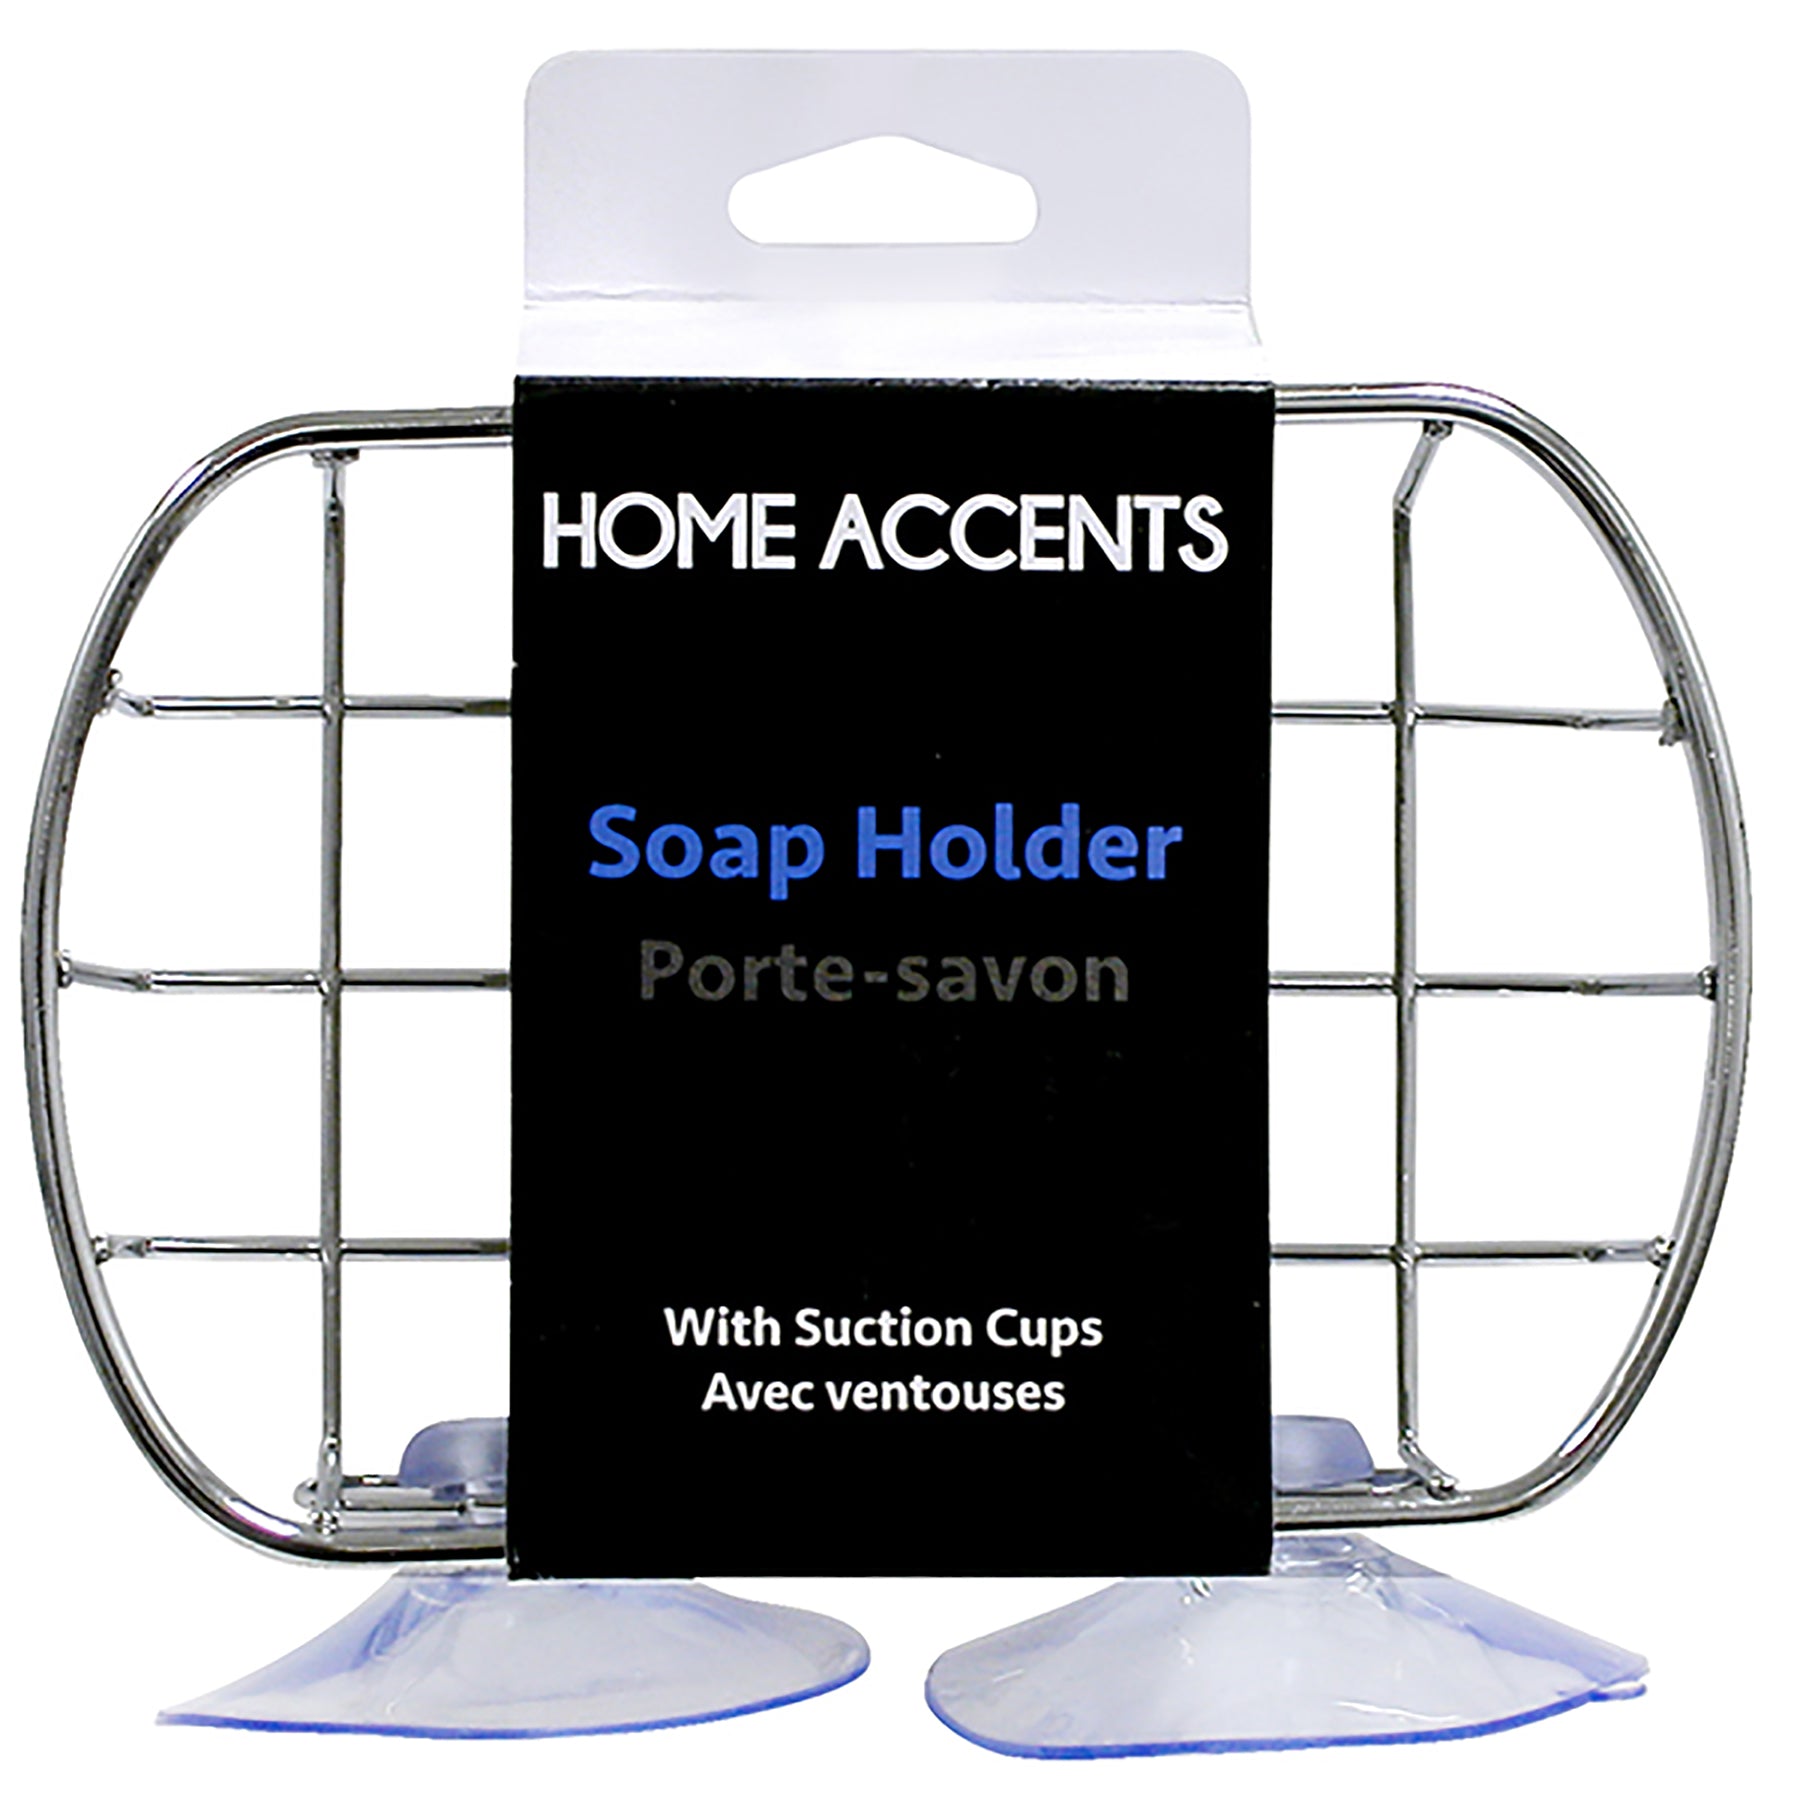 Home Accents Soap Holder Metal with Suction Cup 5x3.25x1.4in